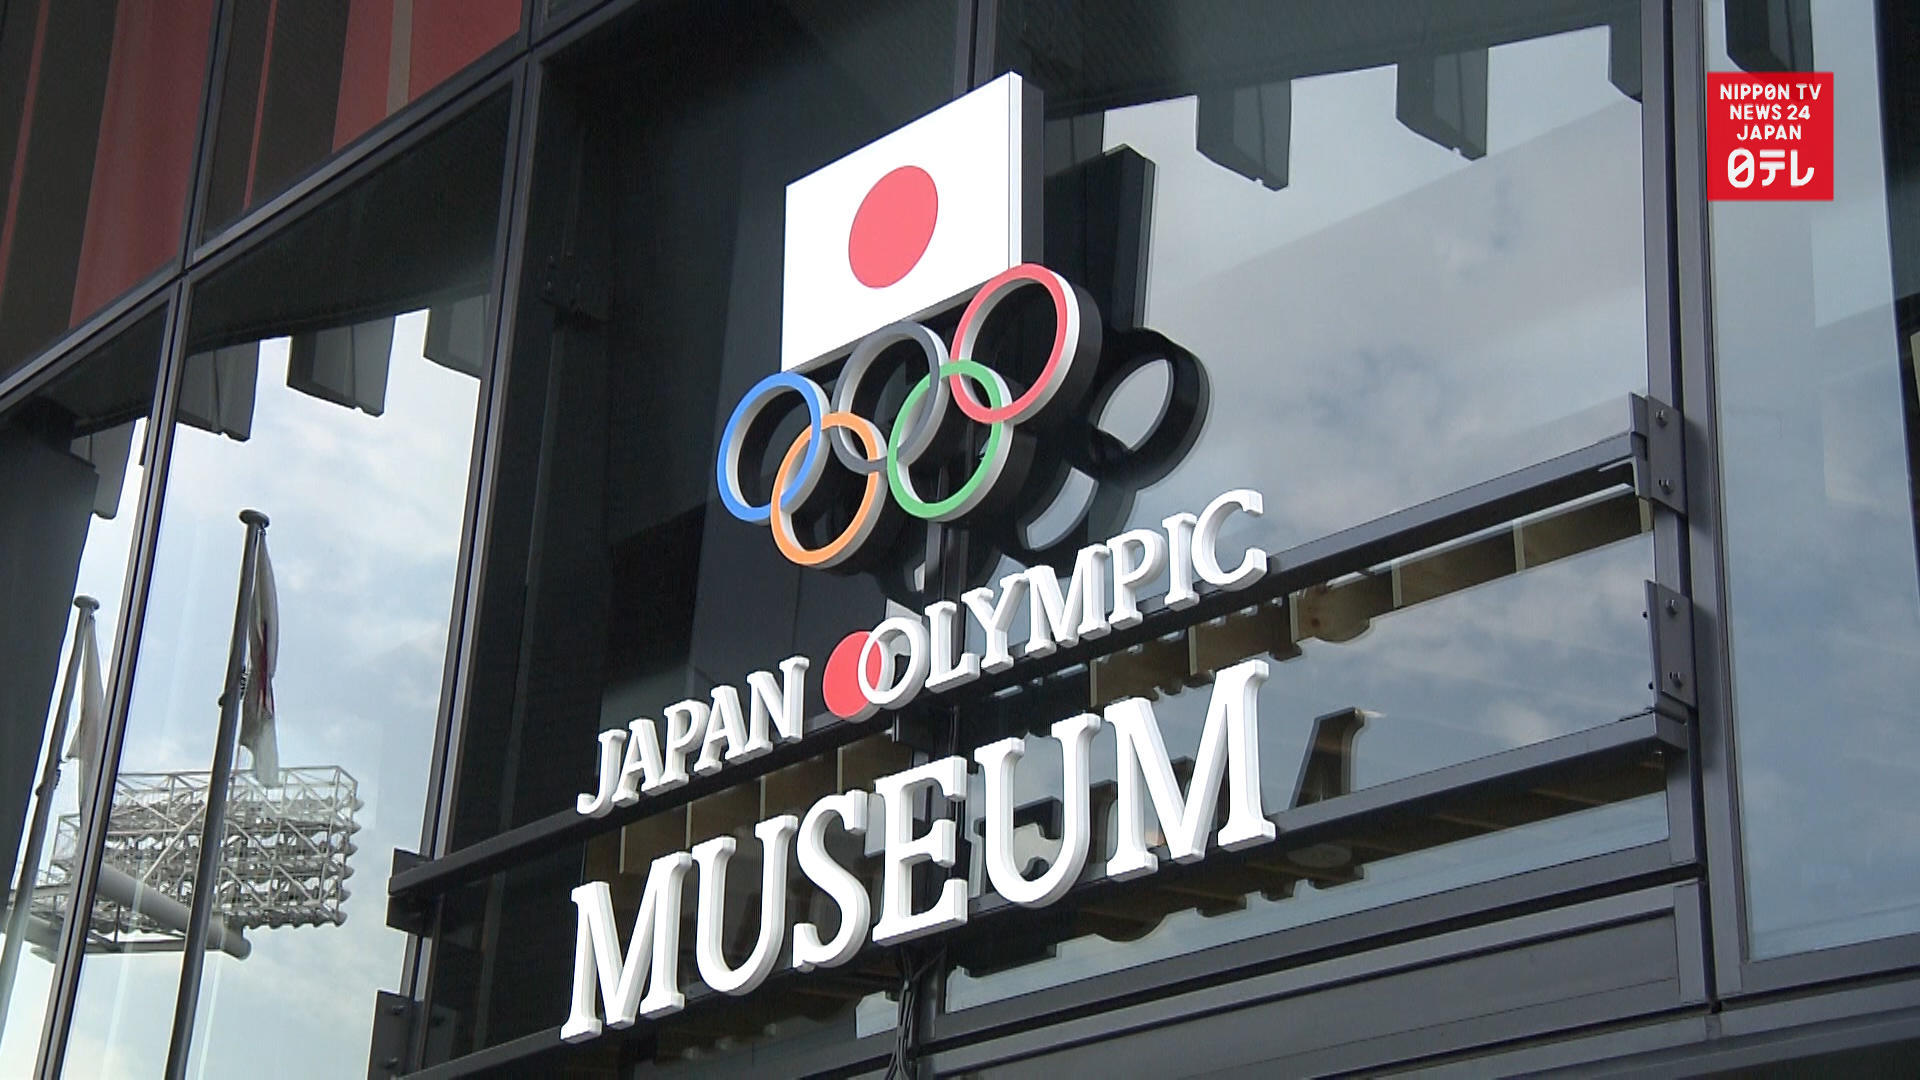 Opening ceremony held for Olympic museum 